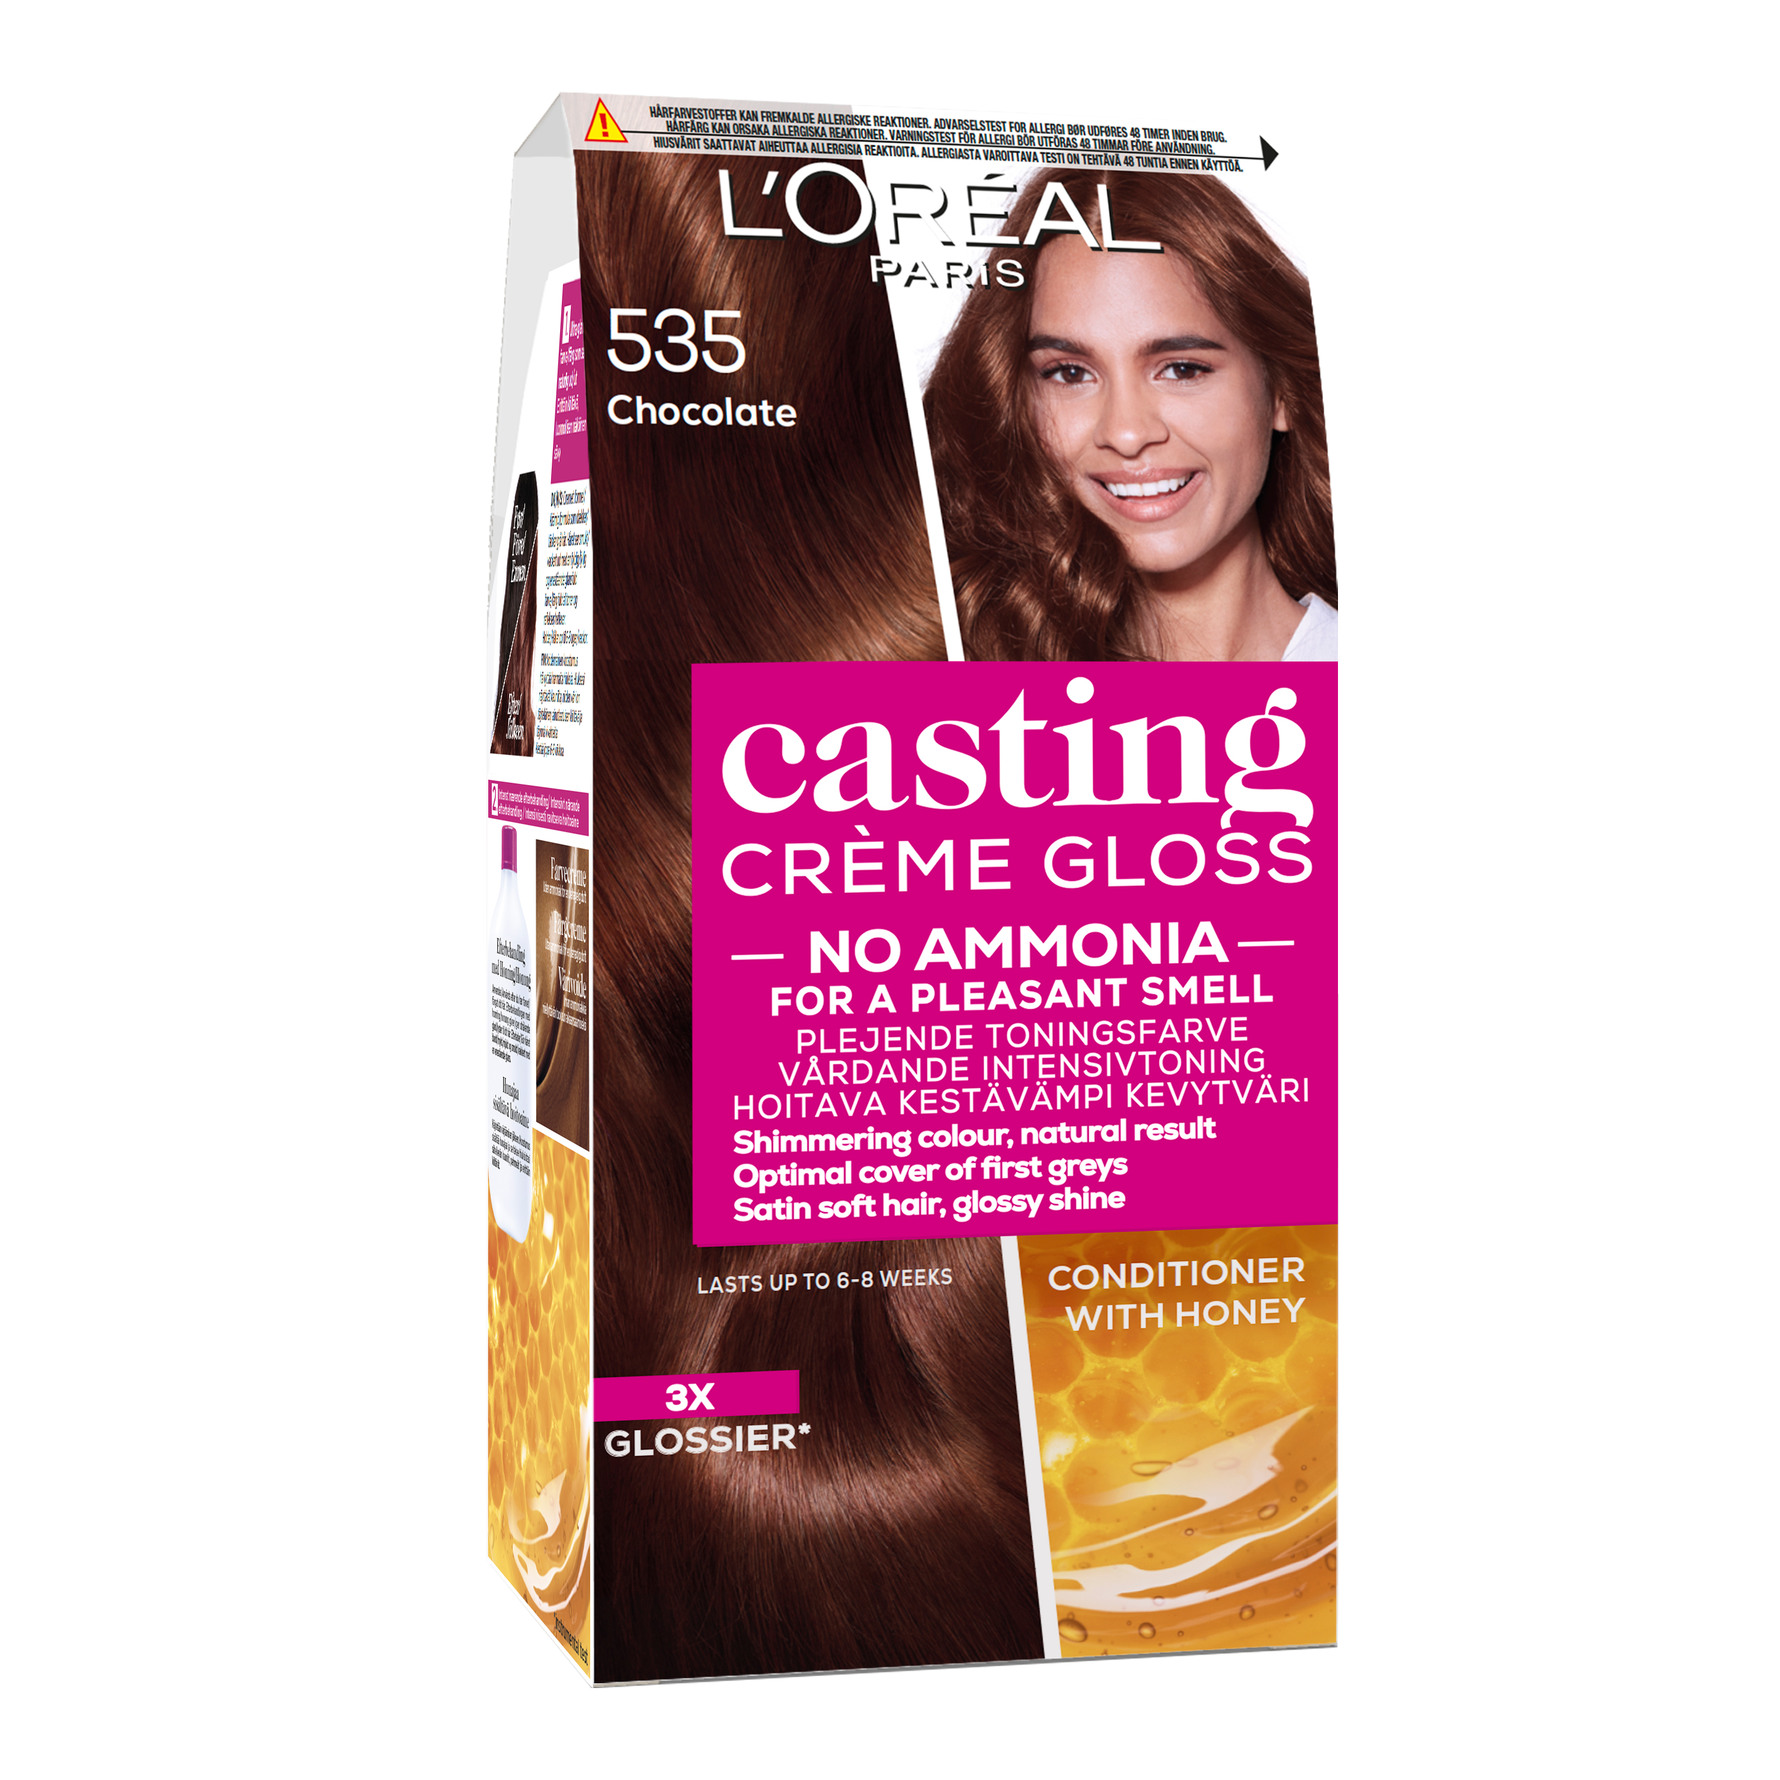 Gloss Loreal Chocolate Glace / Comprar Tintura Loreal Casting Creme Gloss 415 Chocolate - Indulge lips in rich shiny color with l'oral paris lip gloss from colour riche extraordinaire.